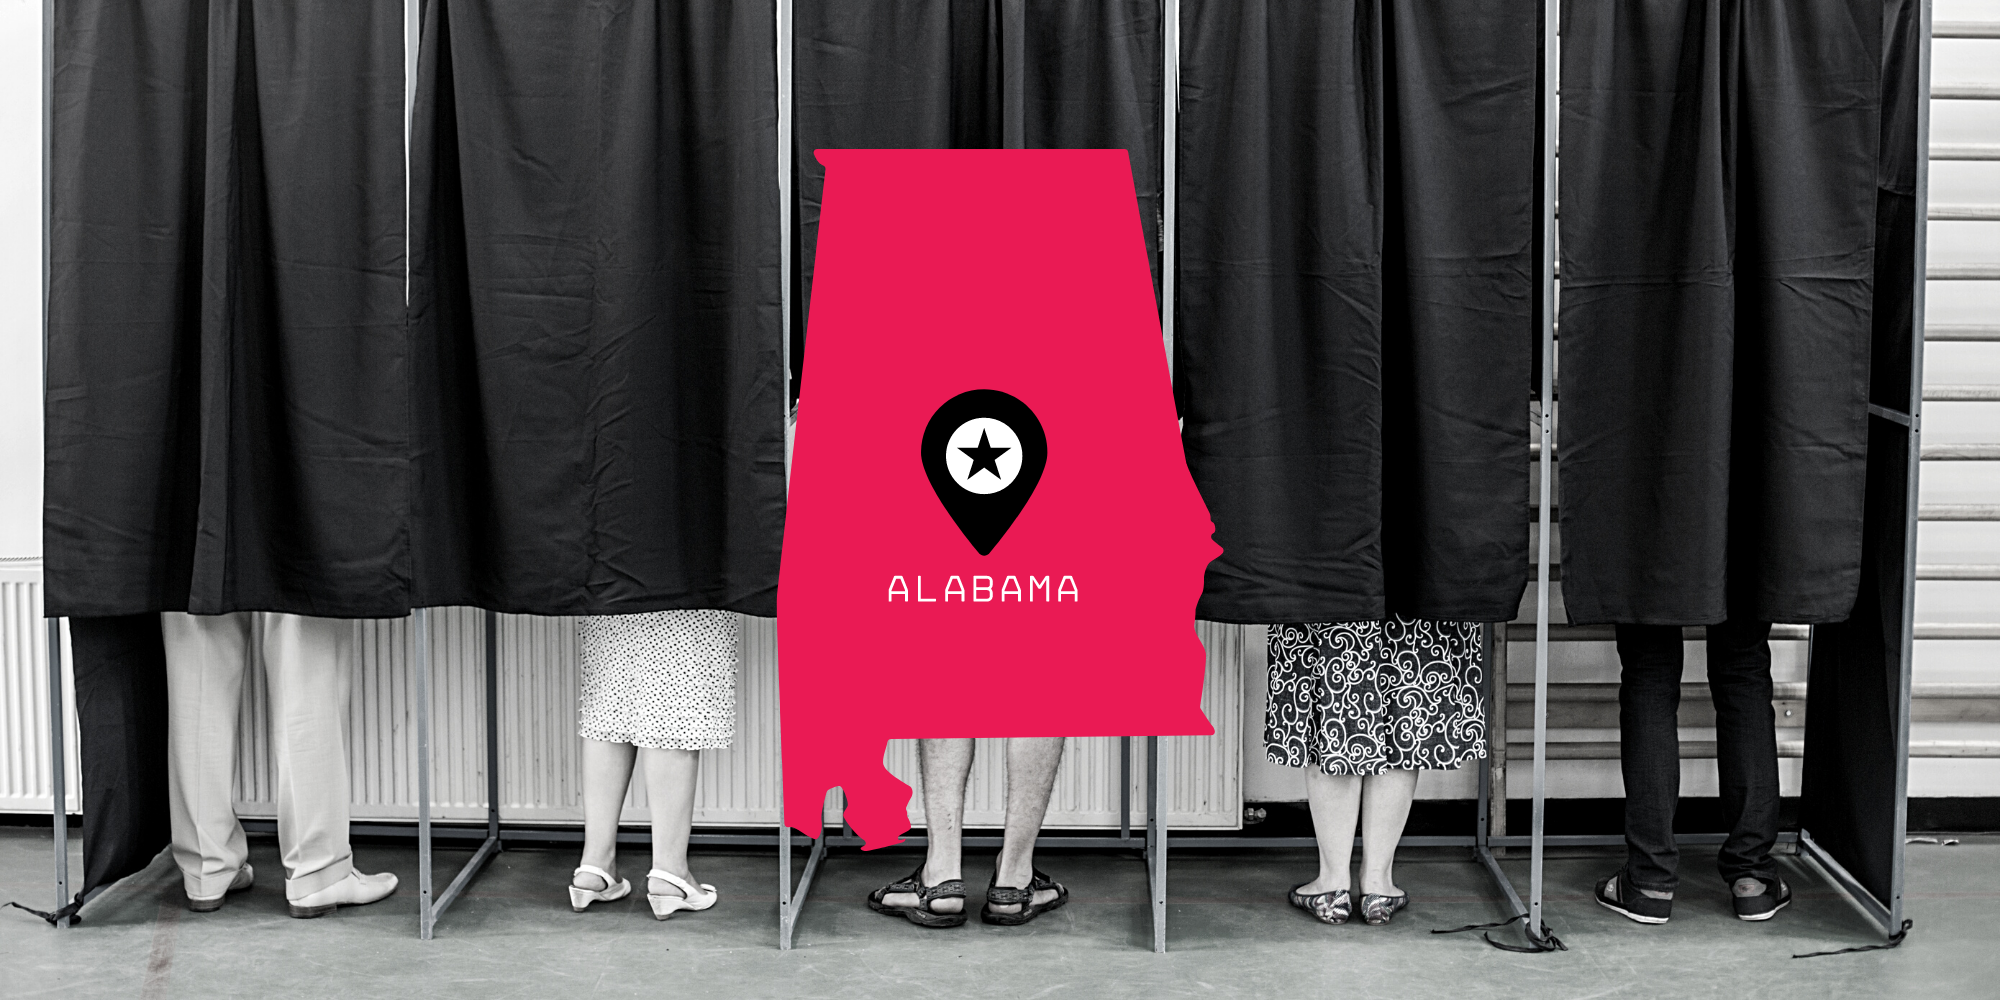 Why is it so hard to vote in Alabama?